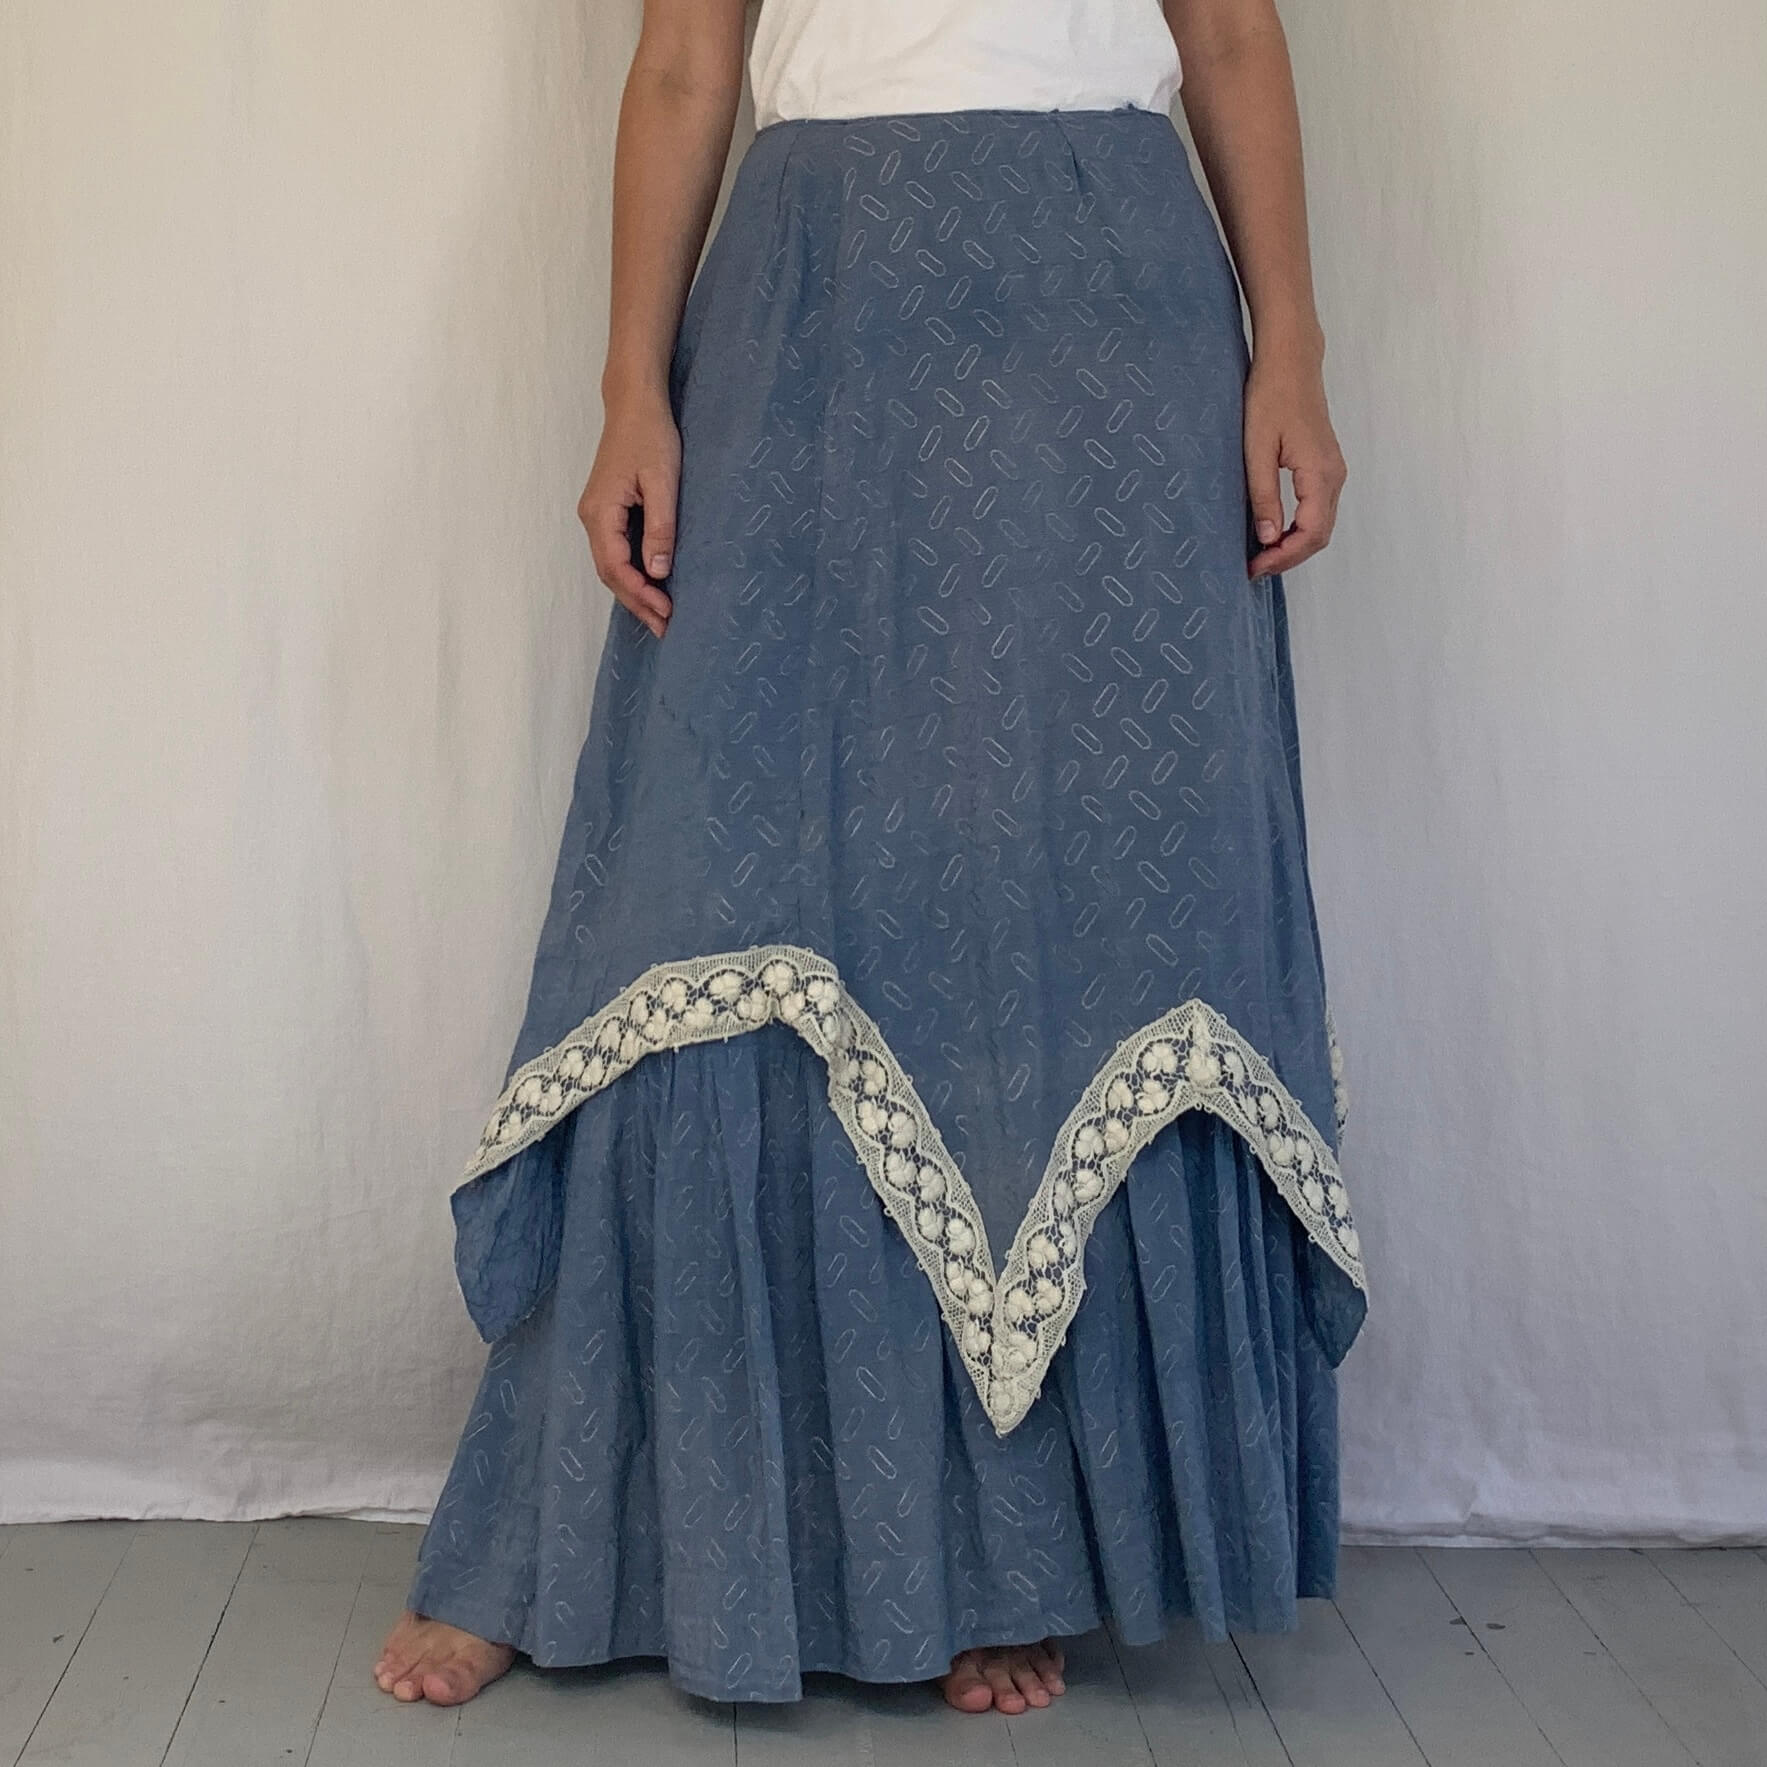 antique skirt from 1900